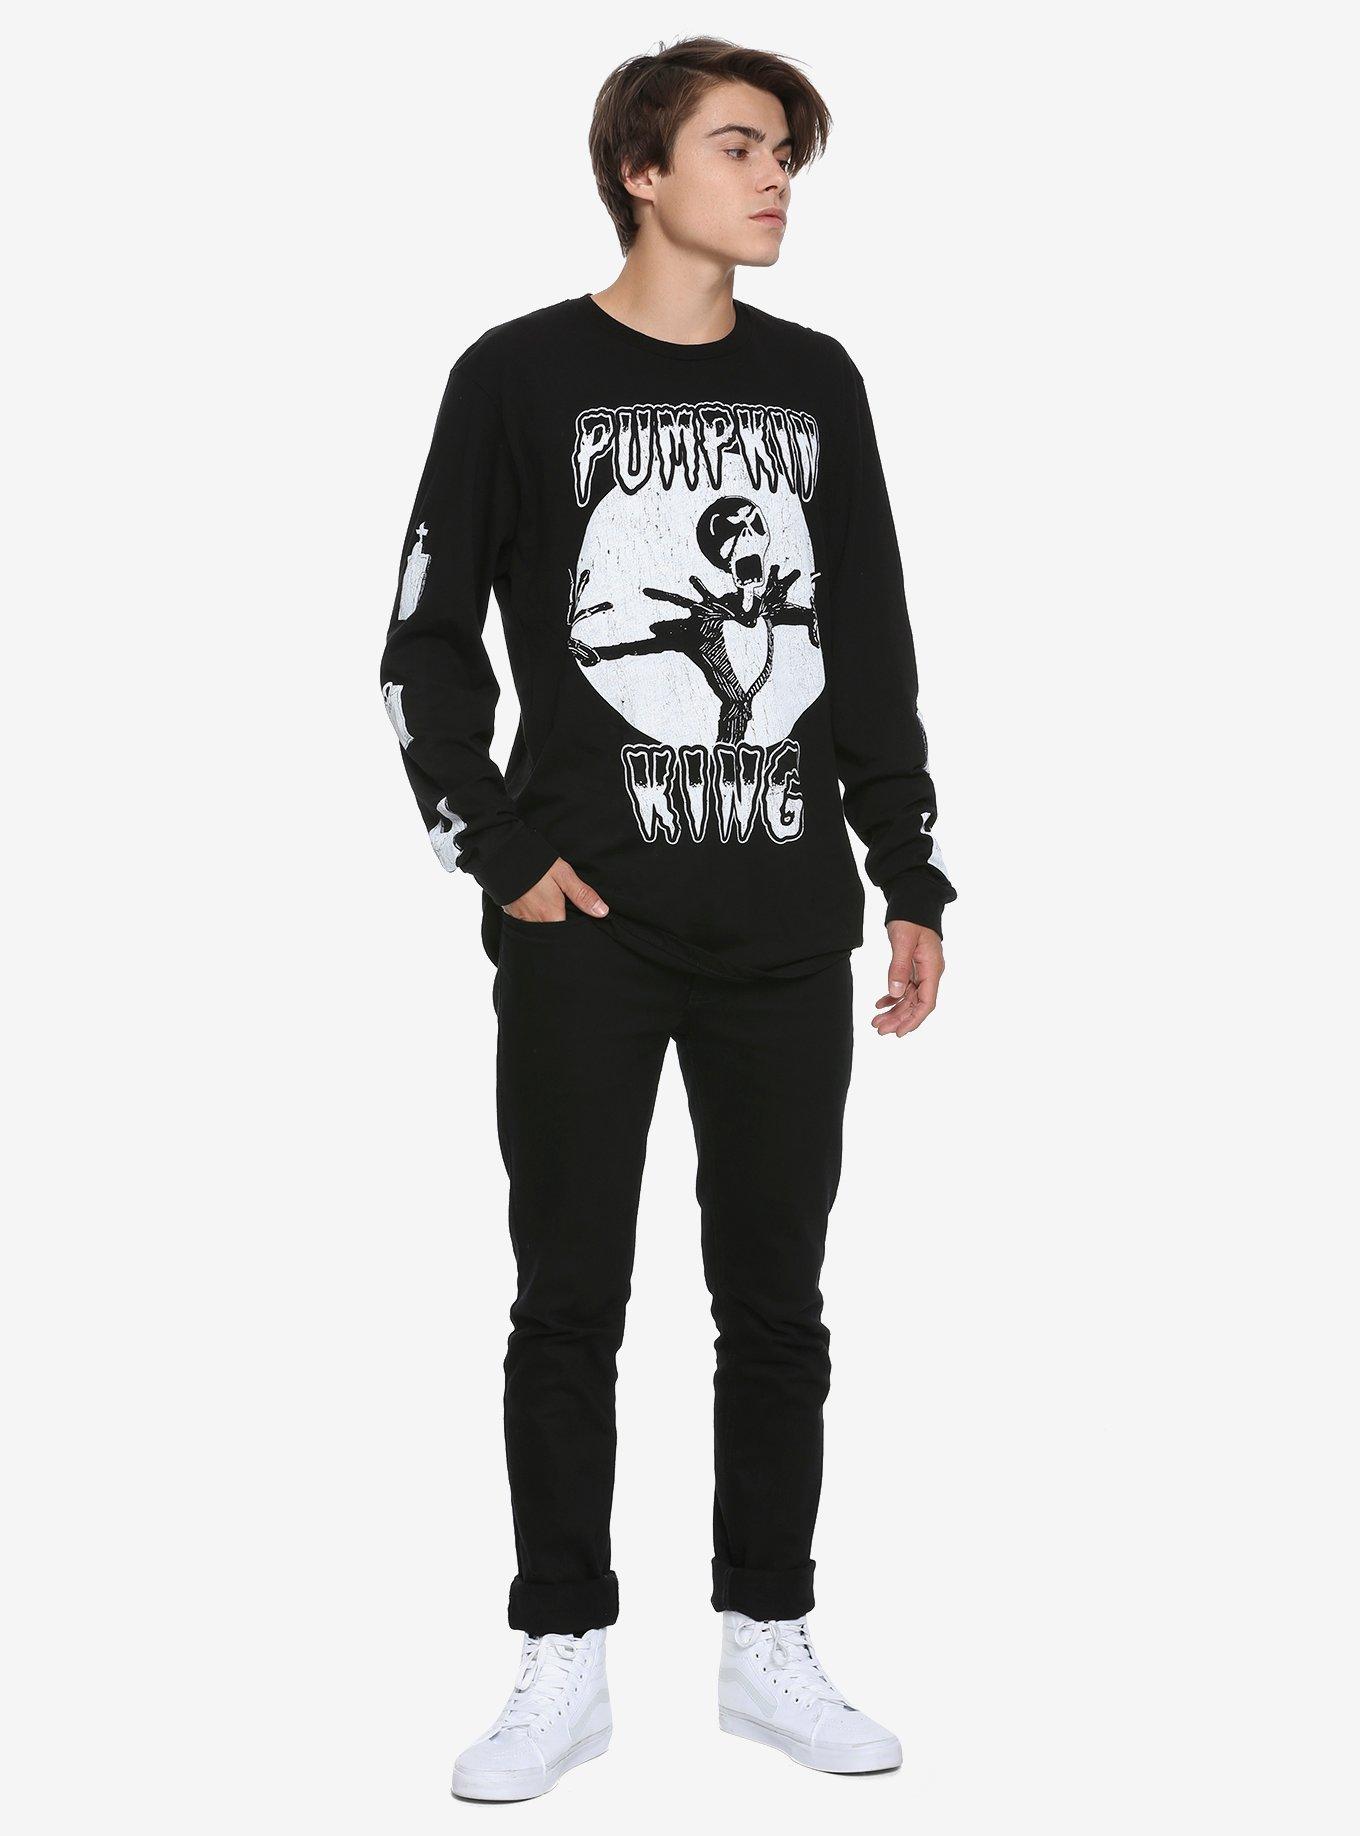 The Nightmare Before Christmas Pumpkin King Long-Sleeve T-Shirt Hot Topic Exclusive, BLACK, alternate